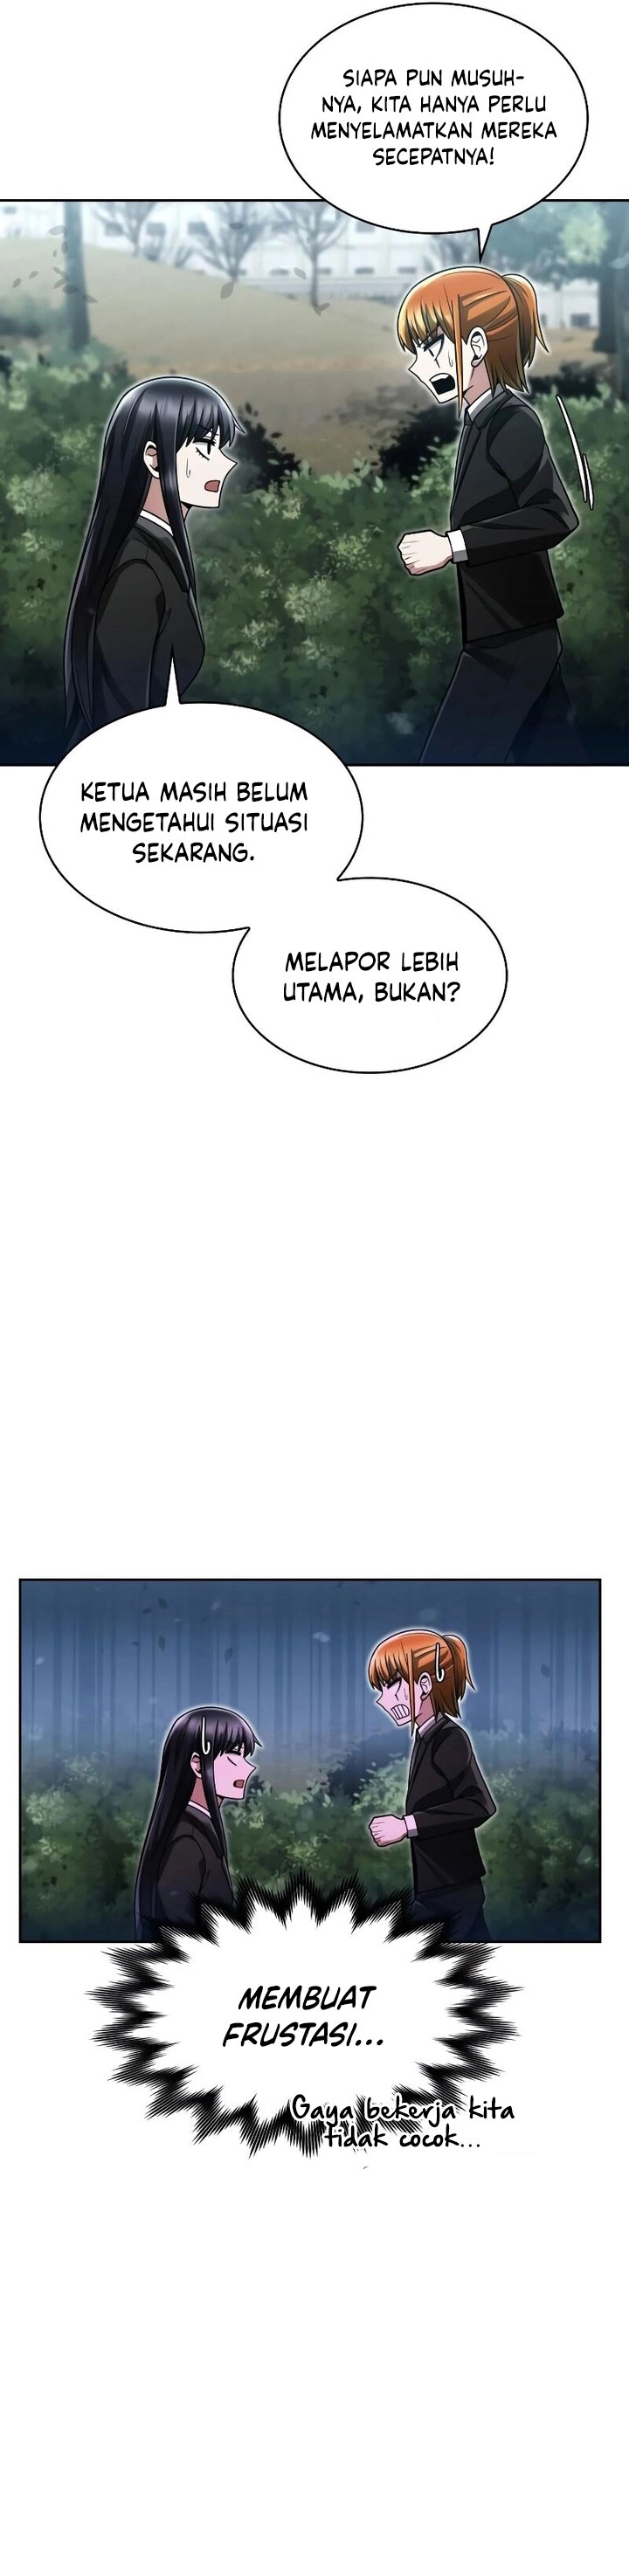 Dilarang COPAS - situs resmi www.mangacanblog.com - Komik clever cleaning life of the returned genius hunter 065 - chapter 65 66 Indonesia clever cleaning life of the returned genius hunter 065 - chapter 65 Terbaru 11|Baca Manga Komik Indonesia|Mangacan